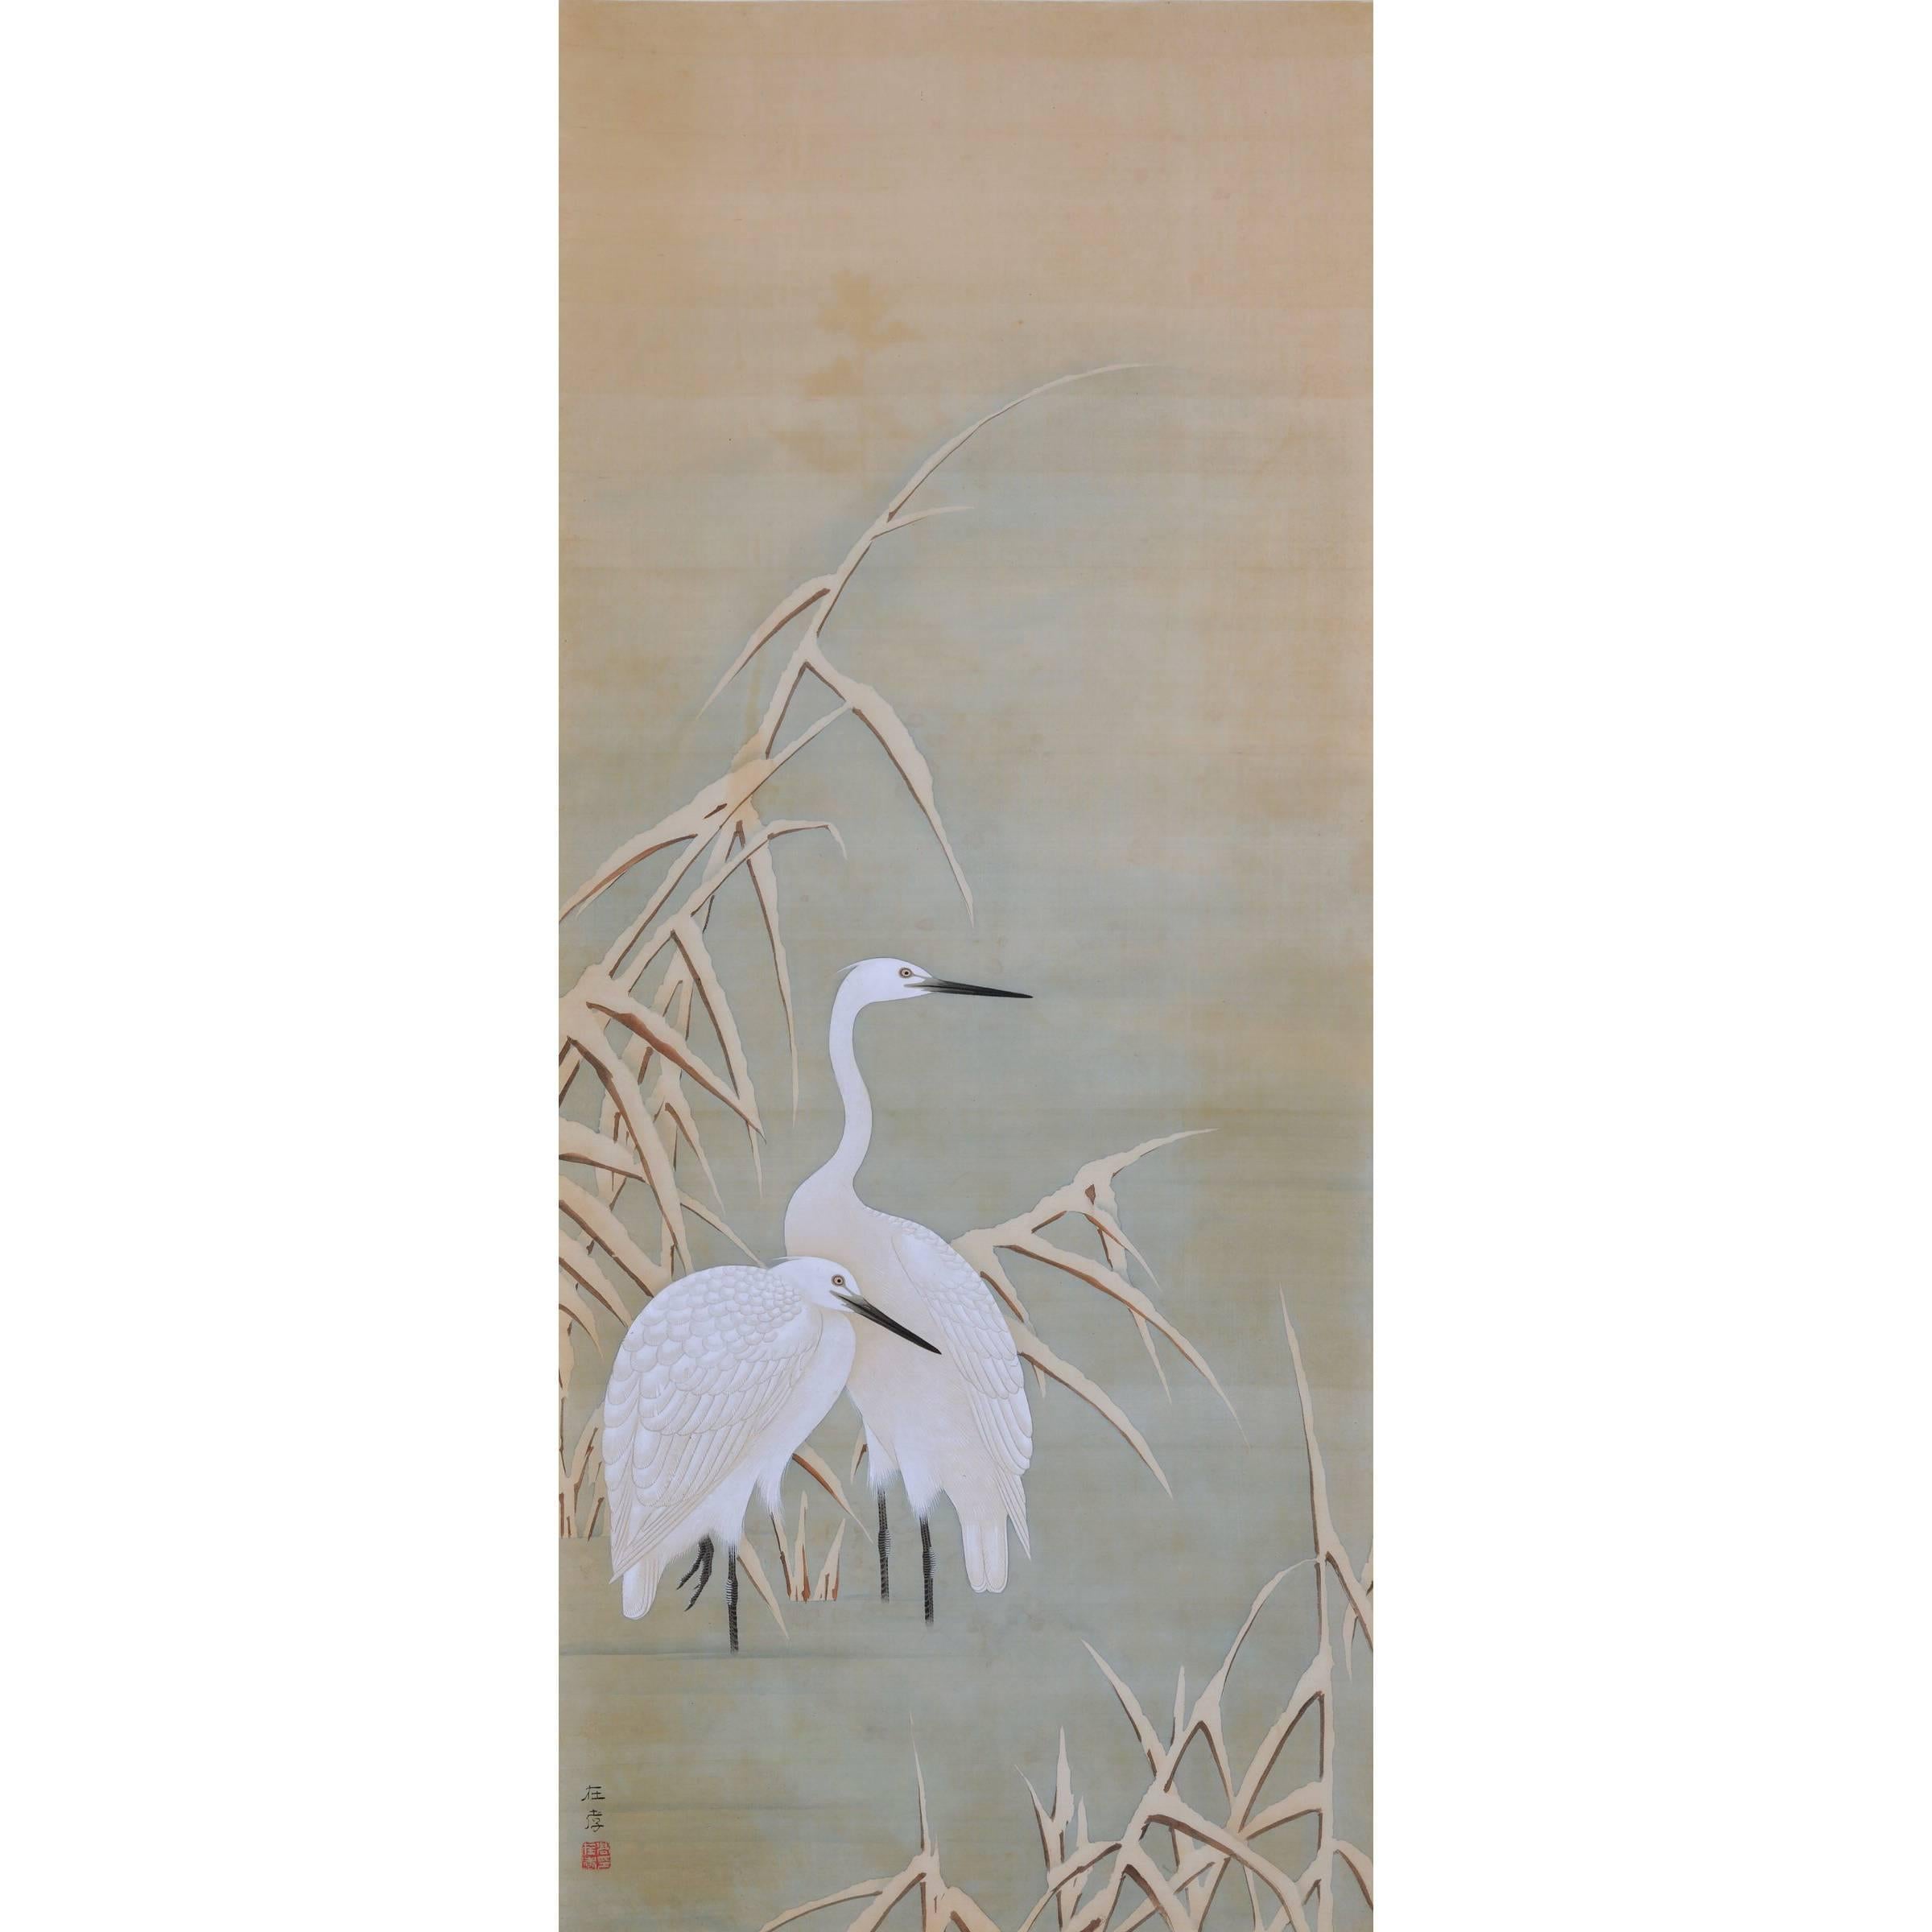 19th Century Japanese Bird and Flower Painting, Herons and Reeds, Hara School